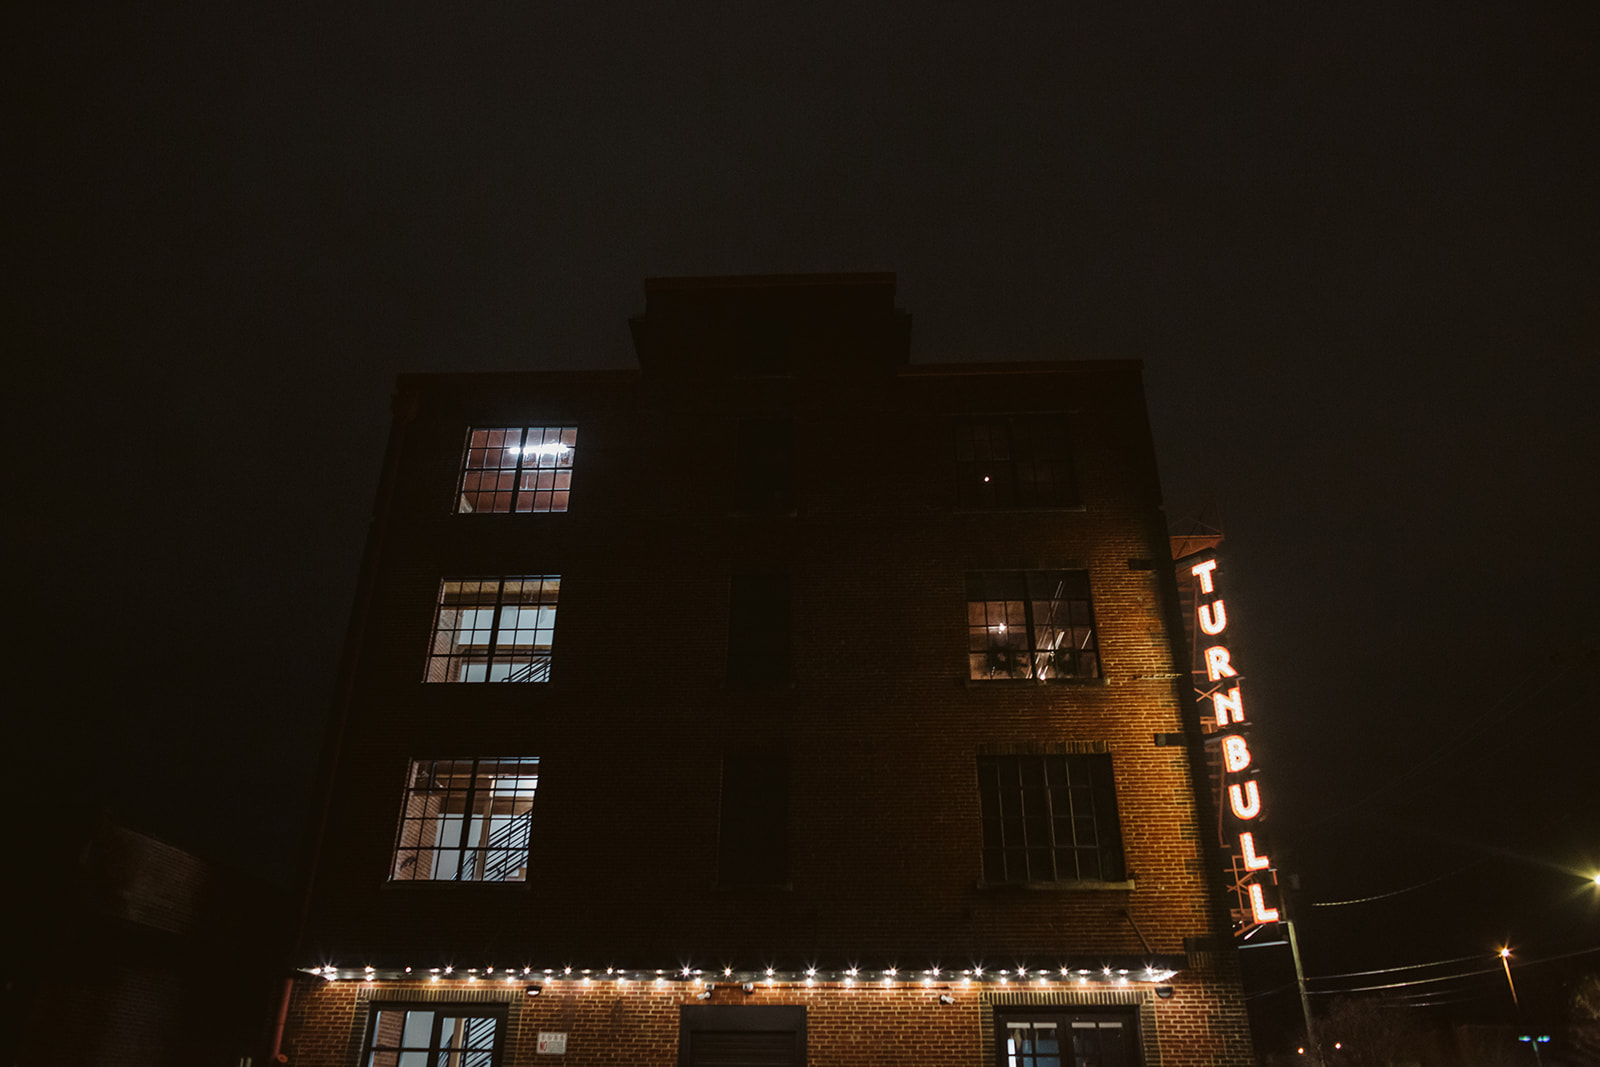 The Turnbull Building from the street outside at night.